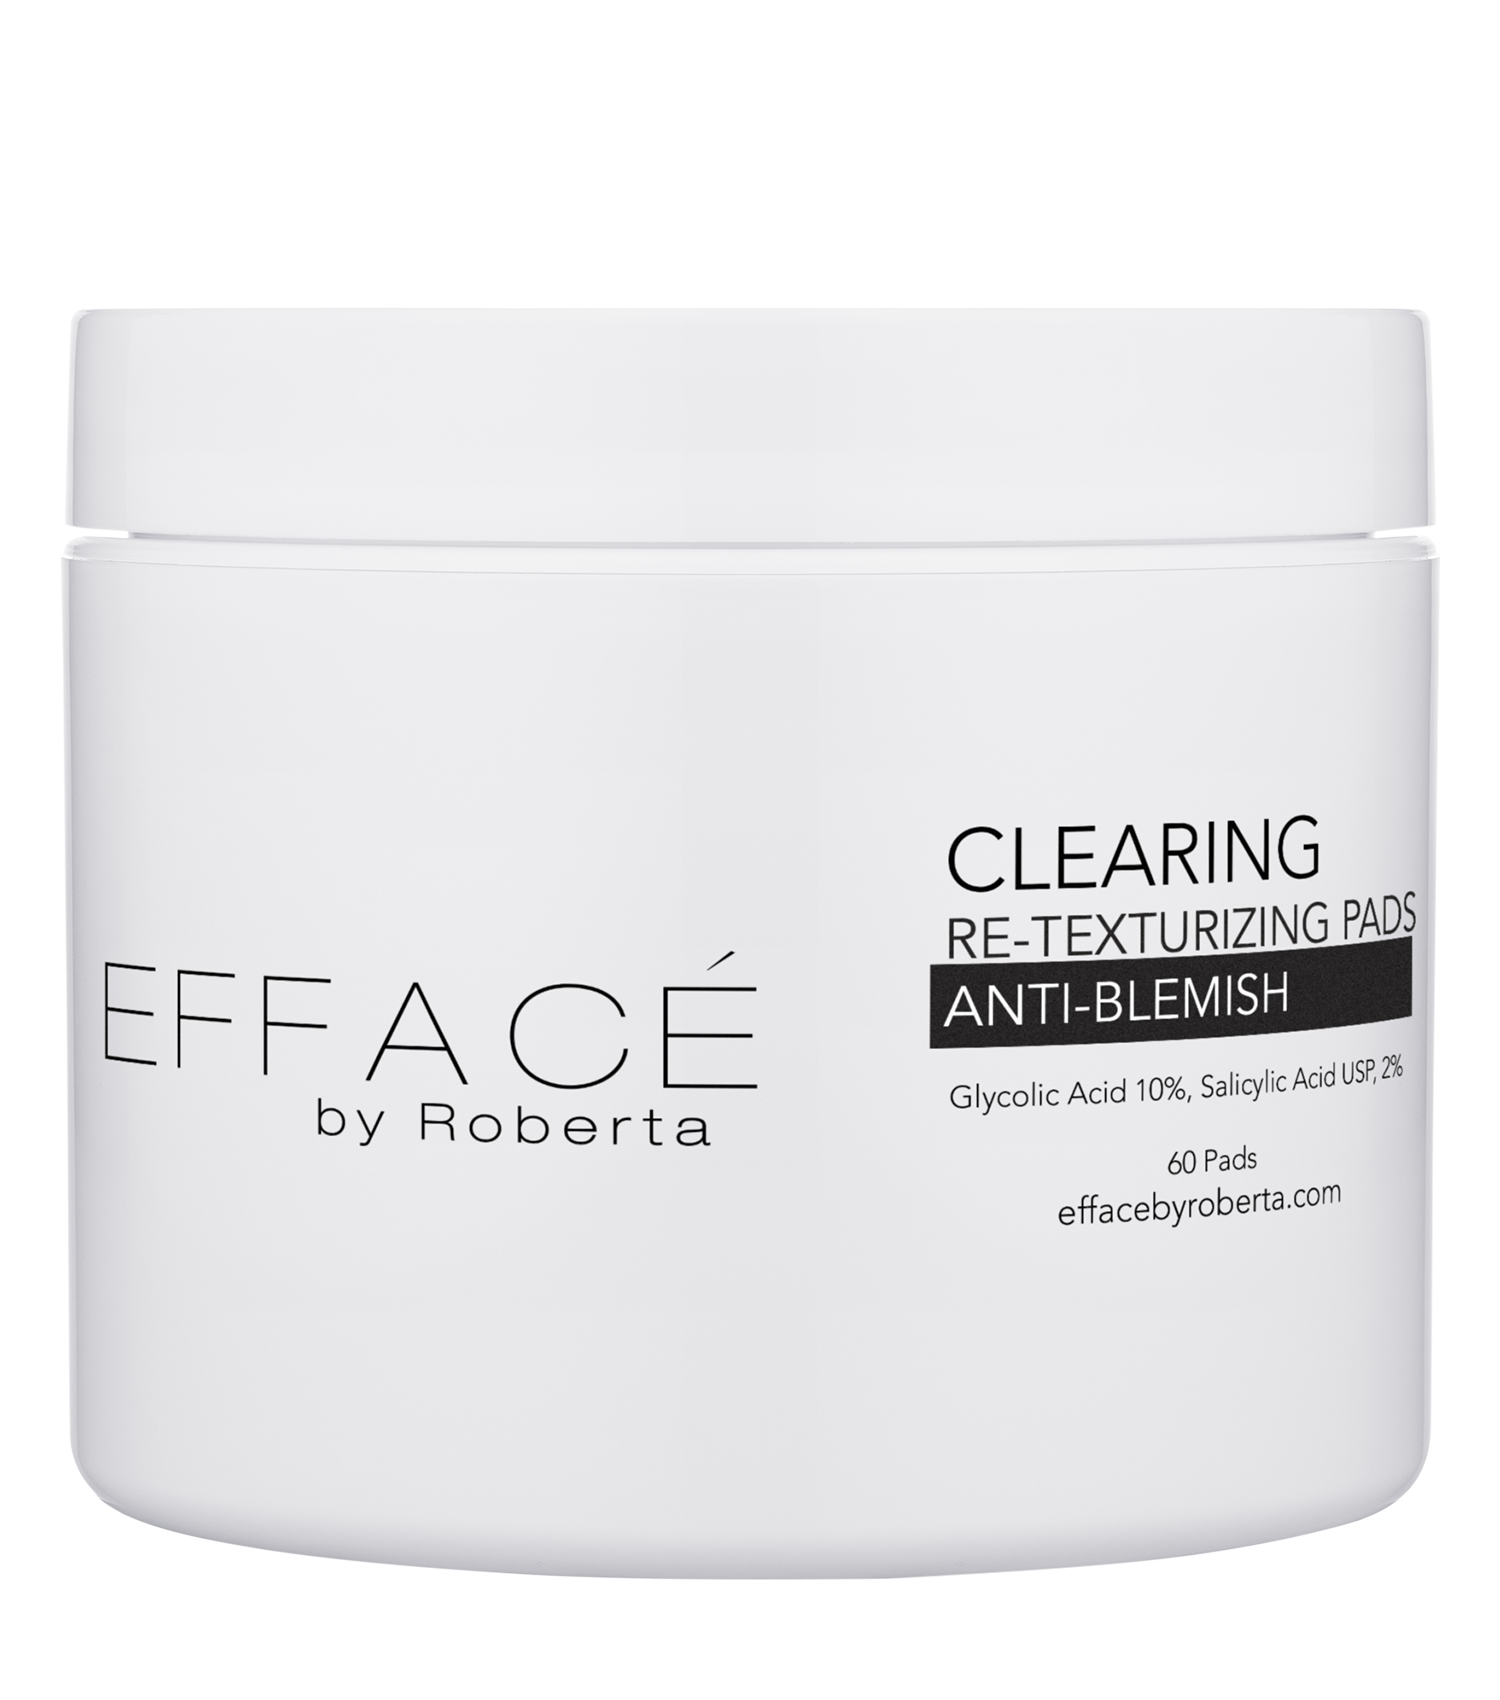 EFFACE Aesthetics Clearing Re-Texturizing Pads EFFACE Aesthetics Clearing Re-Texturizing Pads 1